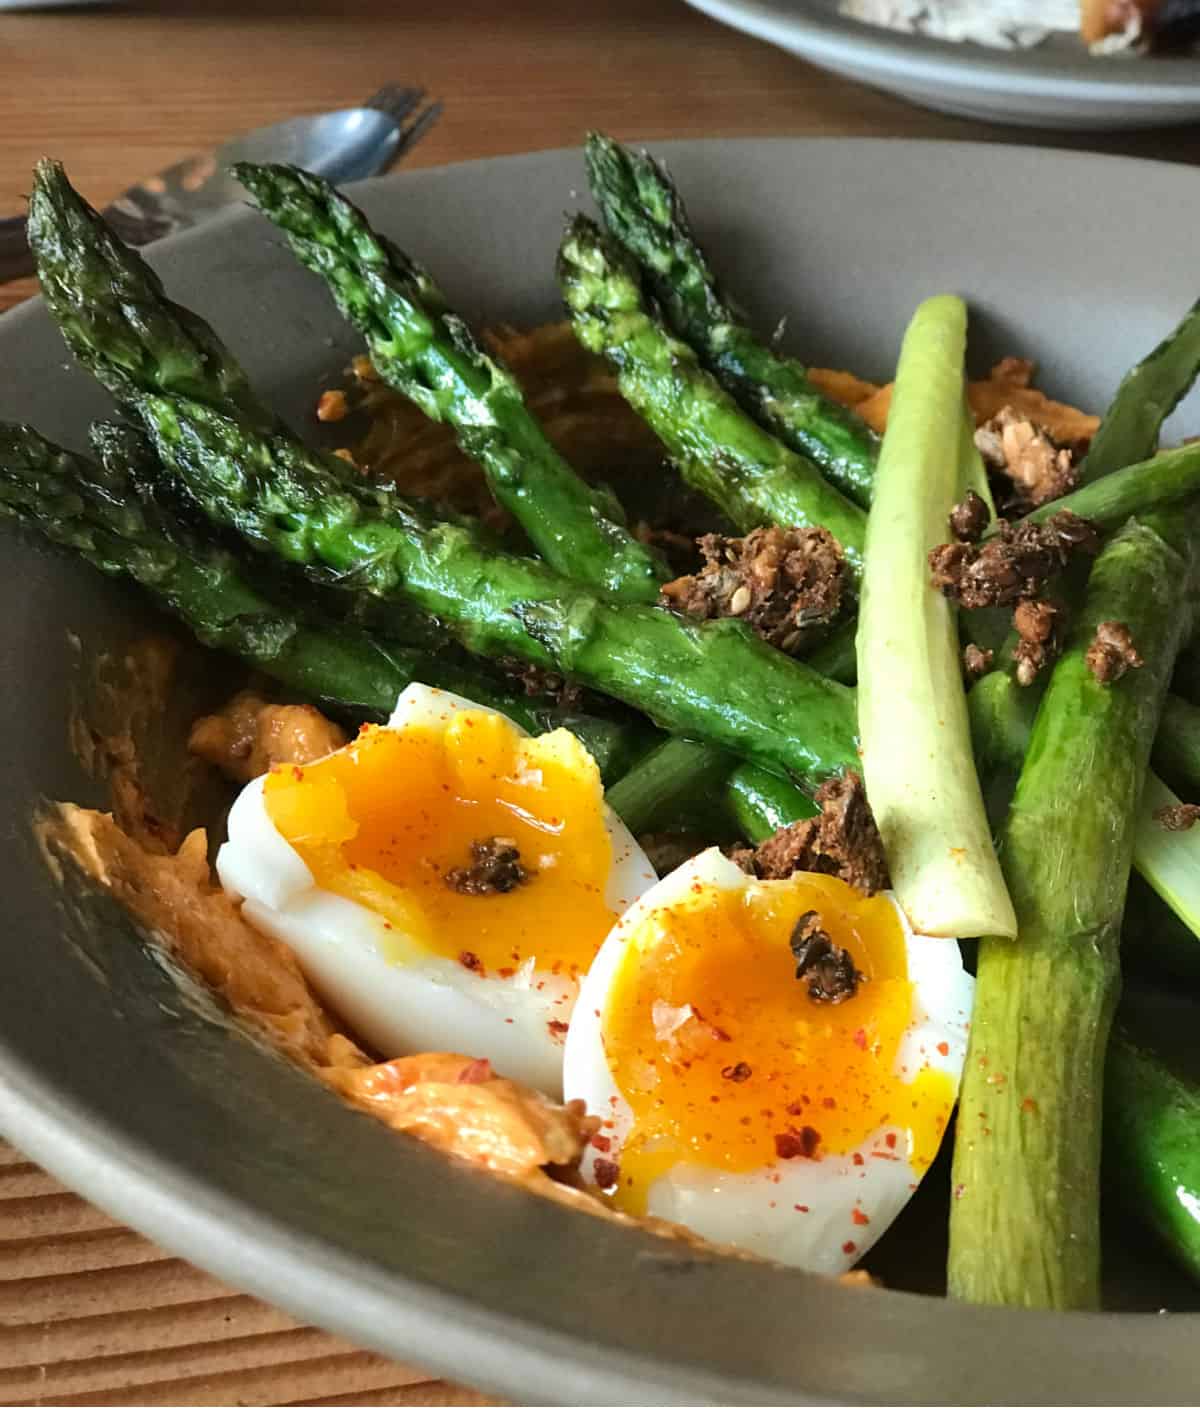 Grey bowl with halved egg, green asparagus, and green onion.